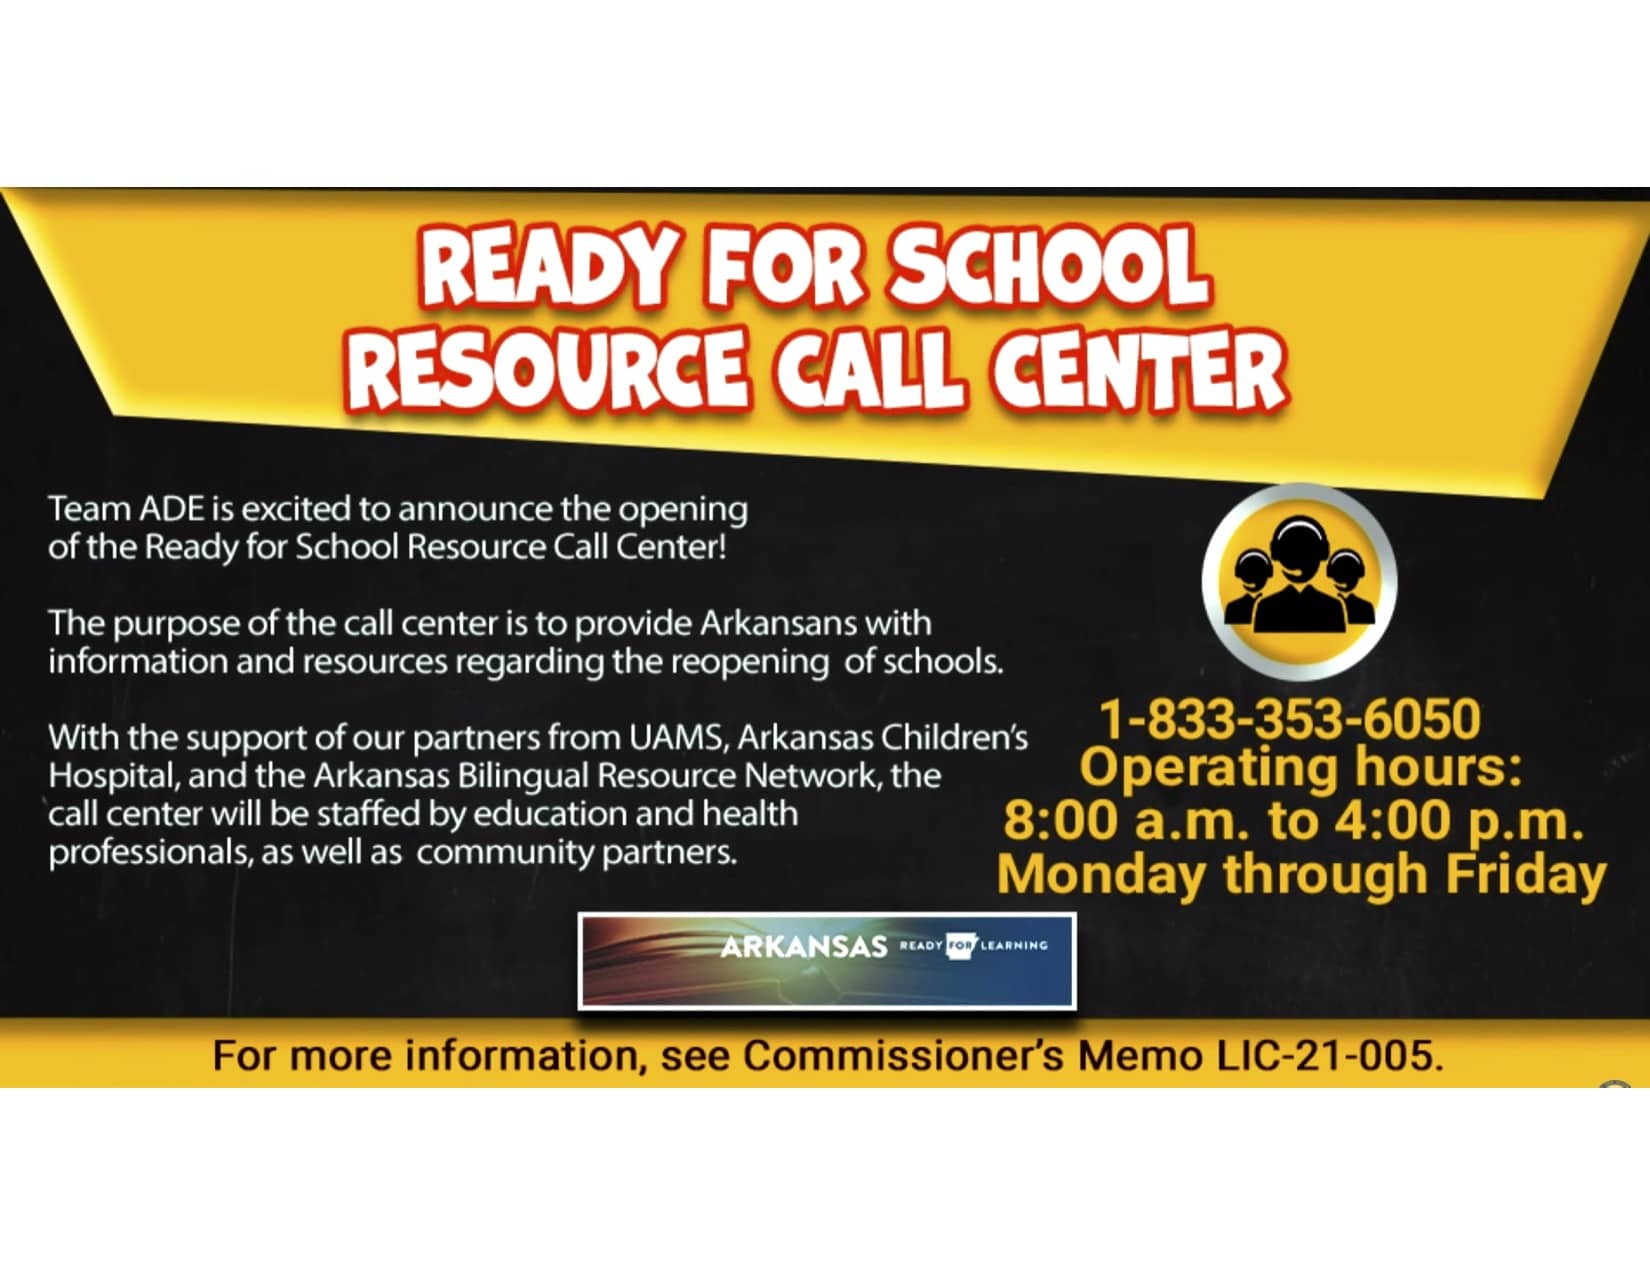 Ready for School Resource Call Center